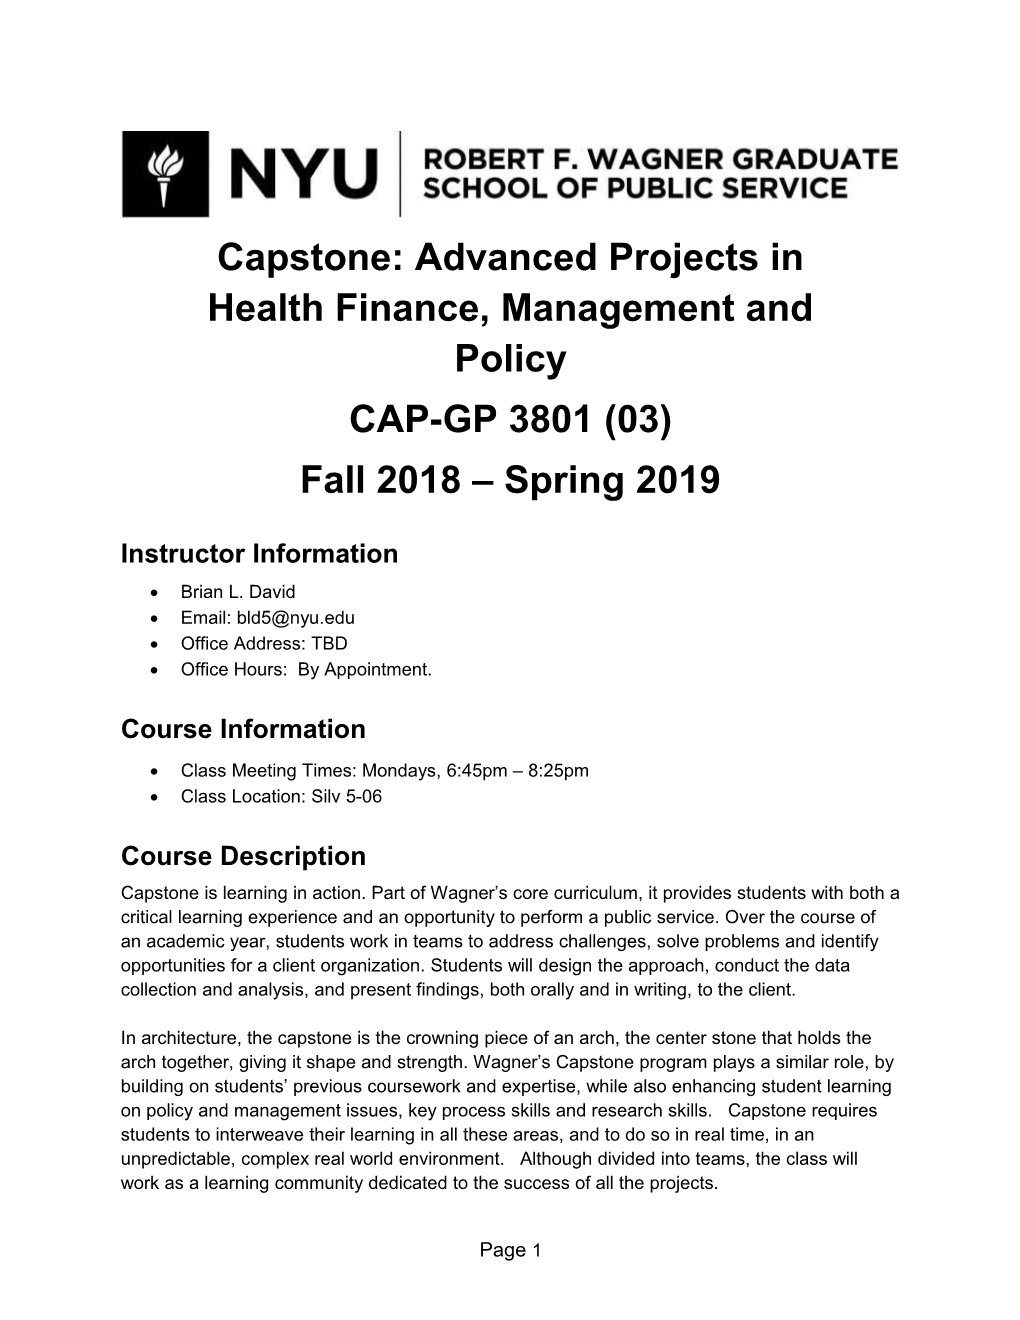 Capstone: Advanced Projects in Health Finance, Management and Policy